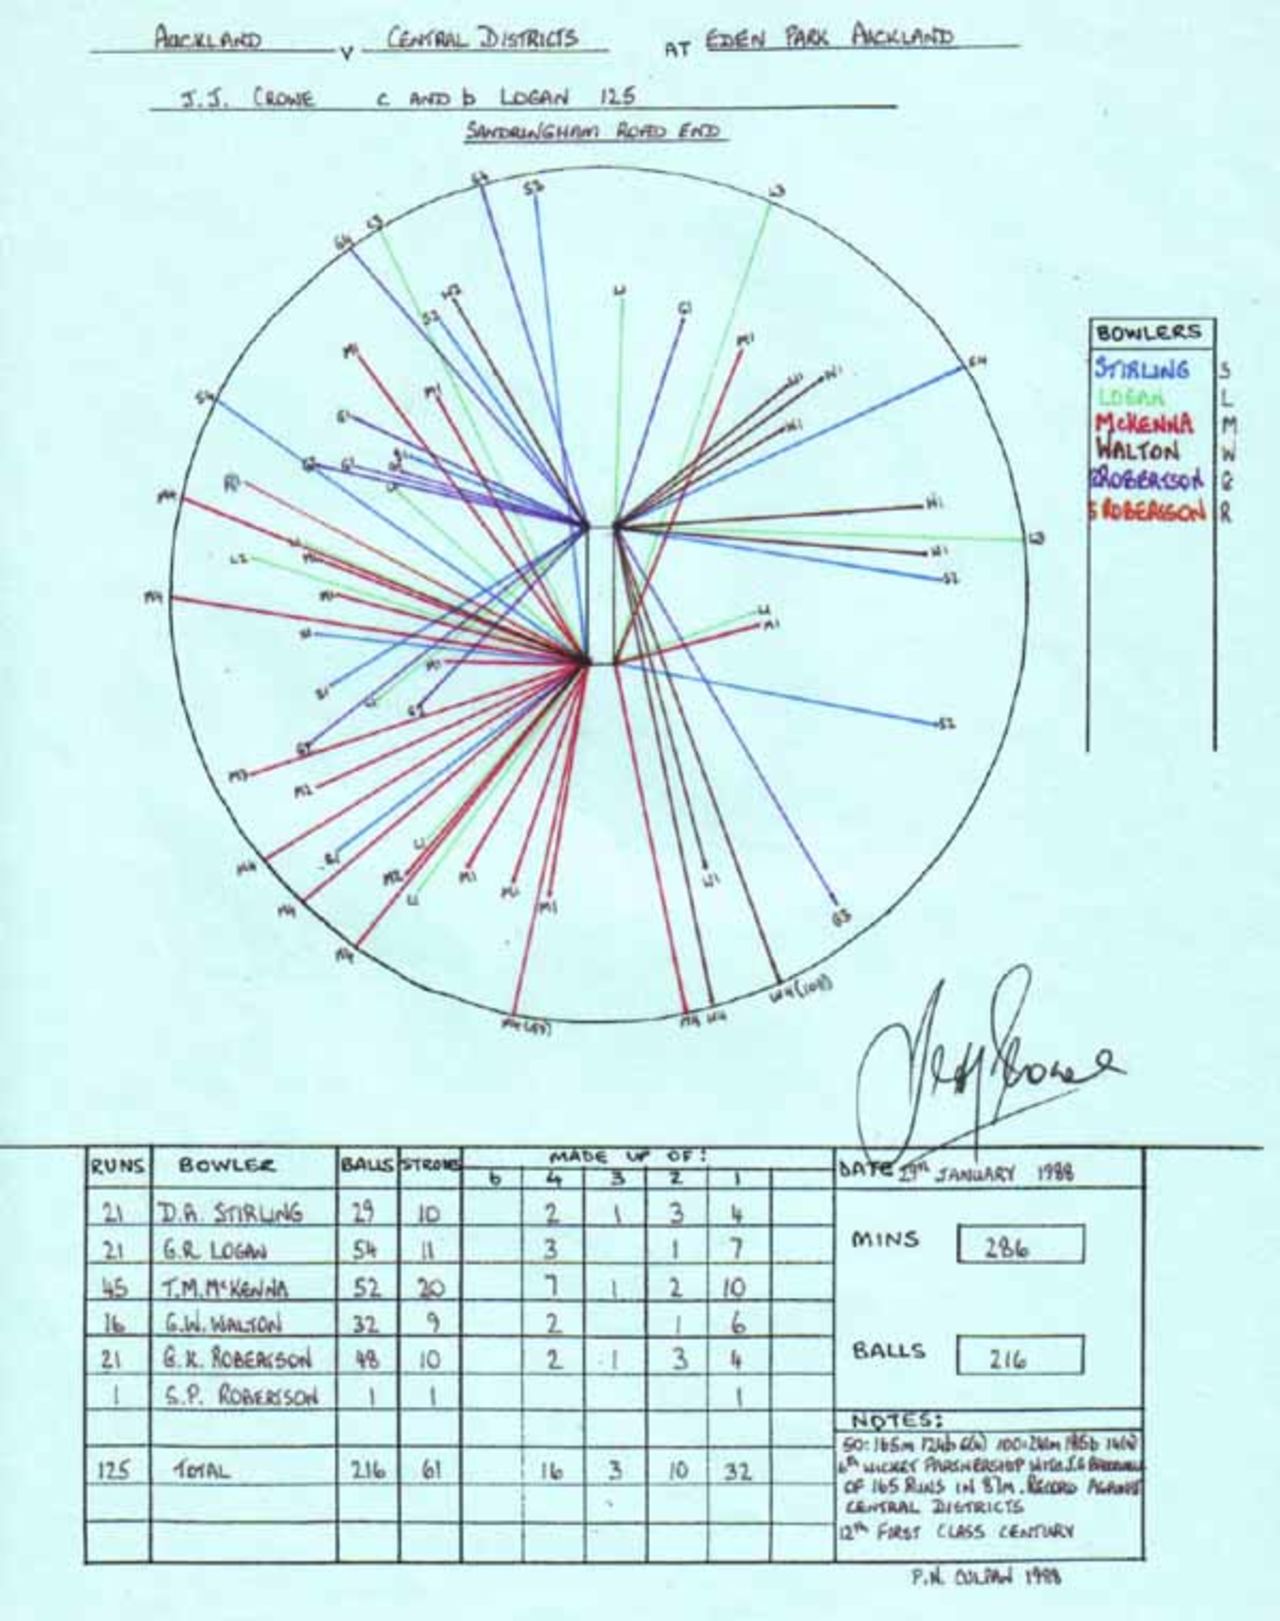 Wagon Wheel of Jeff Crowe's 125 v Central Districts, Eden Park, Auckland 29th January 1988